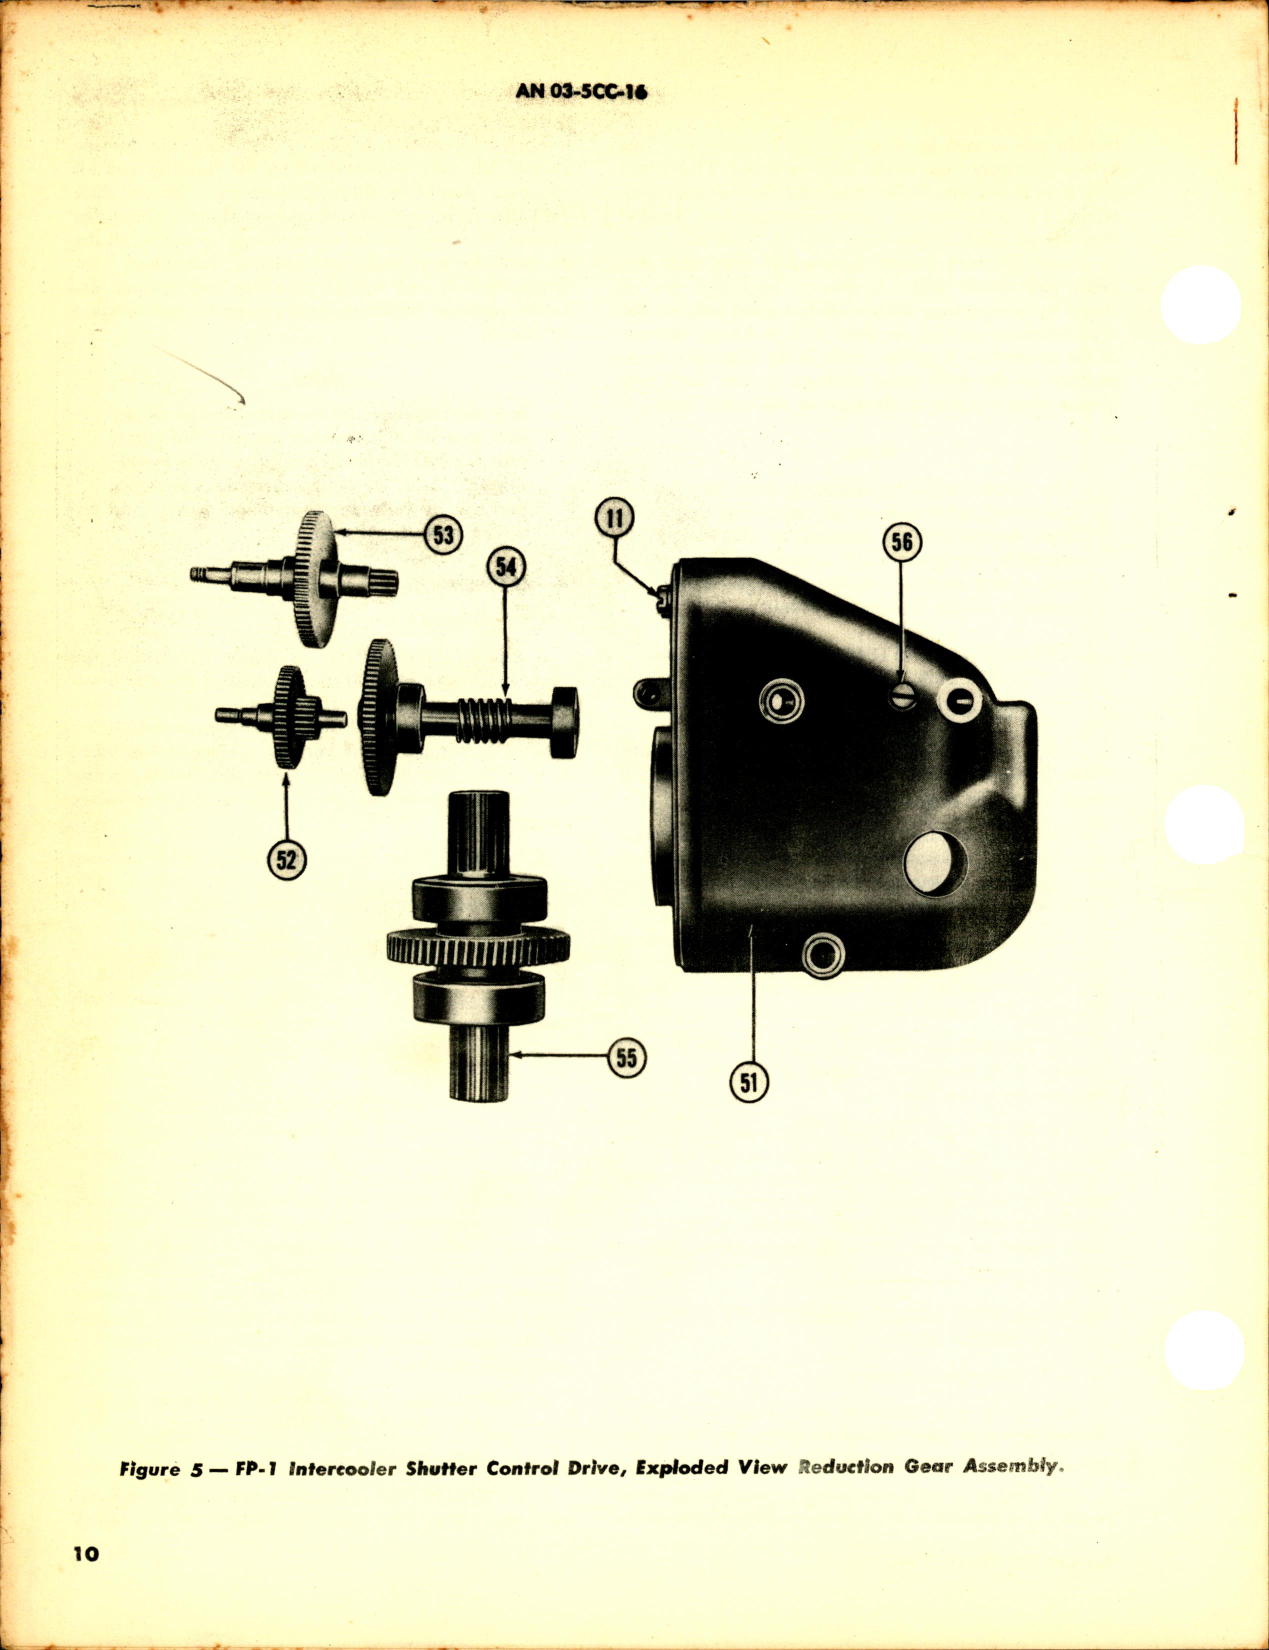 Sample page 4 from AirCorps Library document: Intercooler Shutter Control Drive FP-1